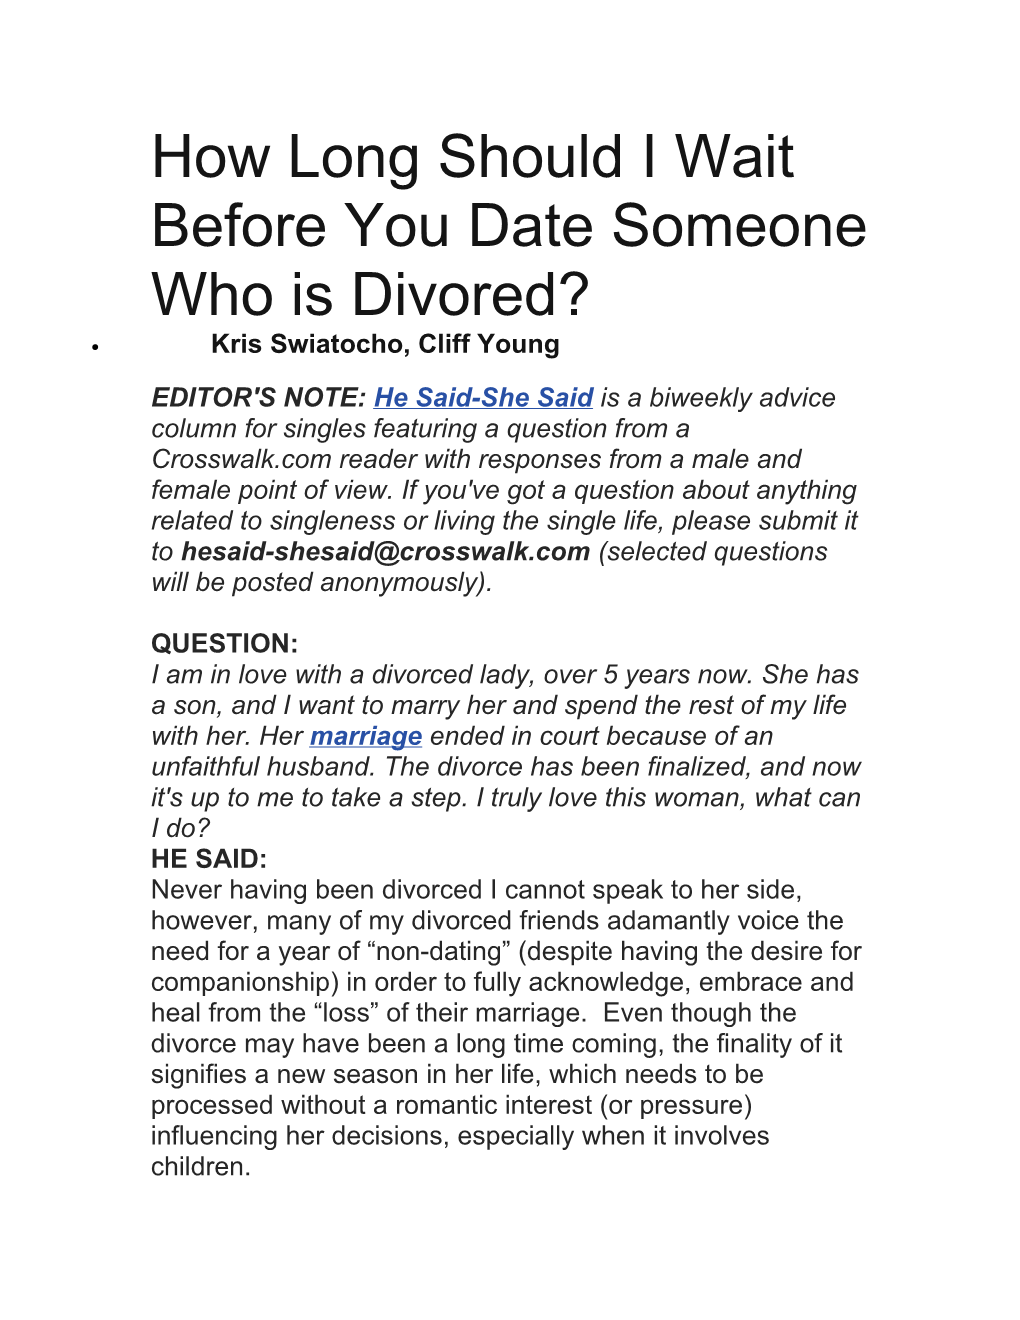 How Long Should I Wait Before You Date Someone Who Is Divored?